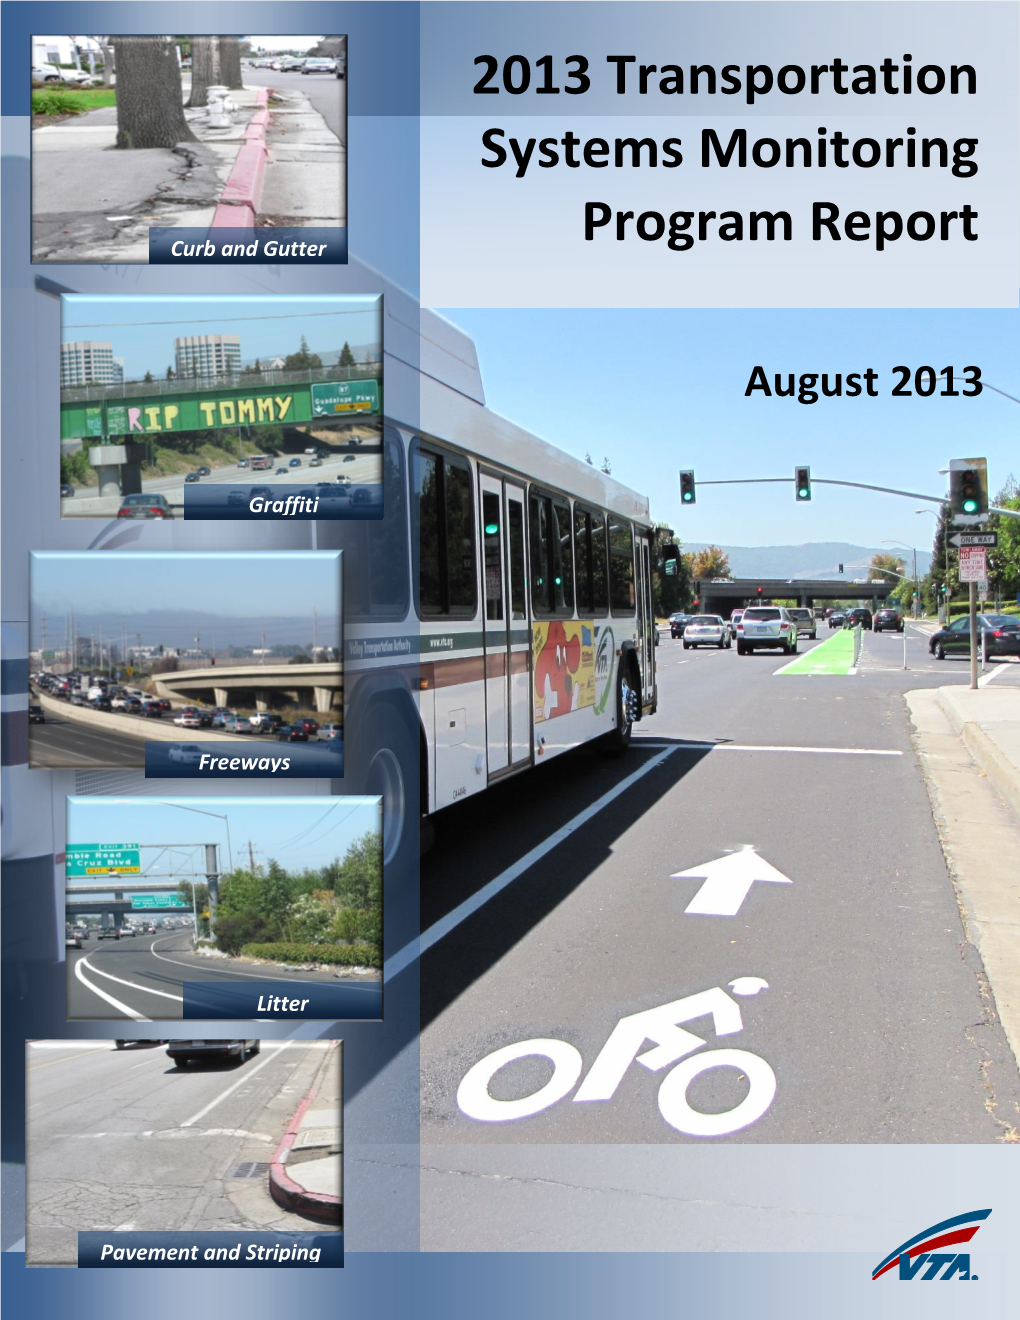 2013 TSMP Report in Response to the Increasing Number of Vandalism Incidents on Santa Clara County’S Roadway